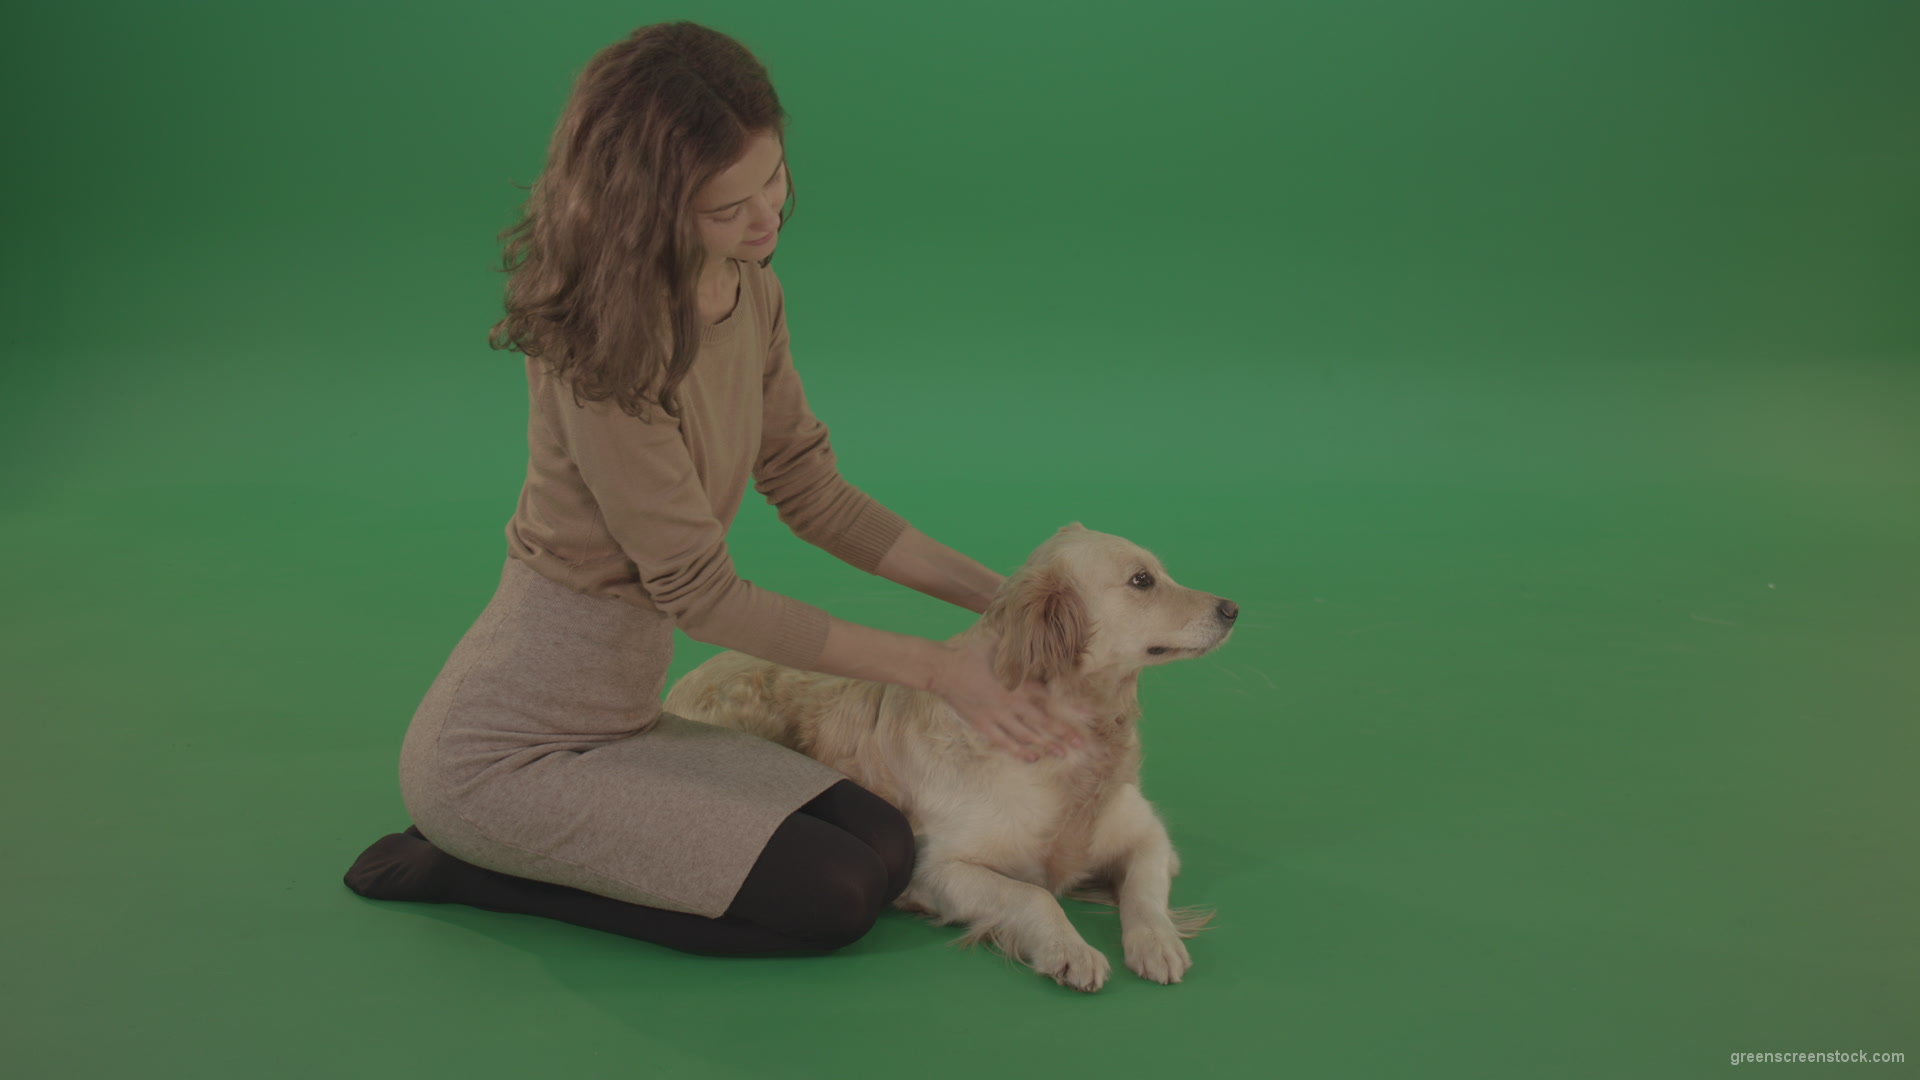 Young-Girl-stroke-the-dog-golden-retriever-big-puppy-isolated-on-green-screen-background_007 Green Screen Stock